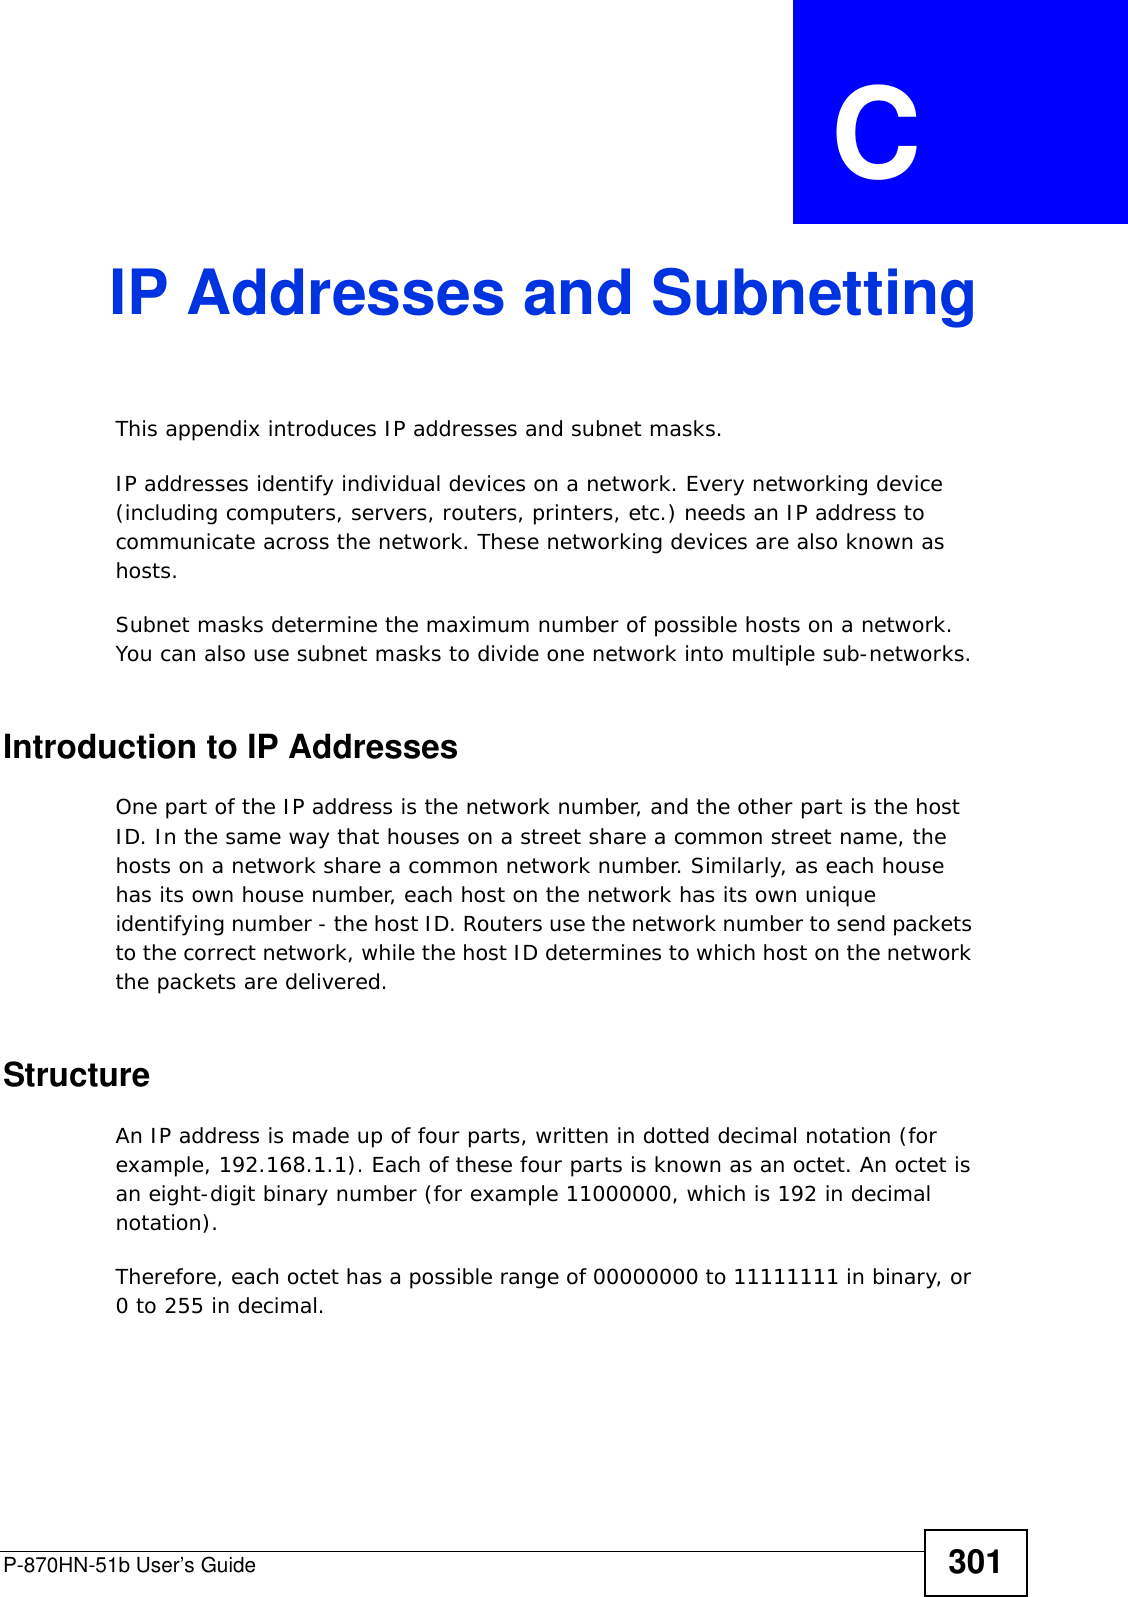 P-870HN-51b User’s Guide 301APPENDIX  C IP Addresses and SubnettingThis appendix introduces IP addresses and subnet masks. IP addresses identify individual devices on a network. Every networking device (including computers, servers, routers, printers, etc.) needs an IP address to communicate across the network. These networking devices are also known as hosts.Subnet masks determine the maximum number of possible hosts on a network. You can also use subnet masks to divide one network into multiple sub-networks.Introduction to IP AddressesOne part of the IP address is the network number, and the other part is the host ID. In the same way that houses on a street share a common street name, the hosts on a network share a common network number. Similarly, as each house has its own house number, each host on the network has its own unique identifying number - the host ID. Routers use the network number to send packets to the correct network, while the host ID determines to which host on the network the packets are delivered.StructureAn IP address is made up of four parts, written in dotted decimal notation (for example, 192.168.1.1). Each of these four parts is known as an octet. An octet is an eight-digit binary number (for example 11000000, which is 192 in decimal notation). Therefore, each octet has a possible range of 00000000 to 11111111 in binary, or 0 to 255 in decimal.